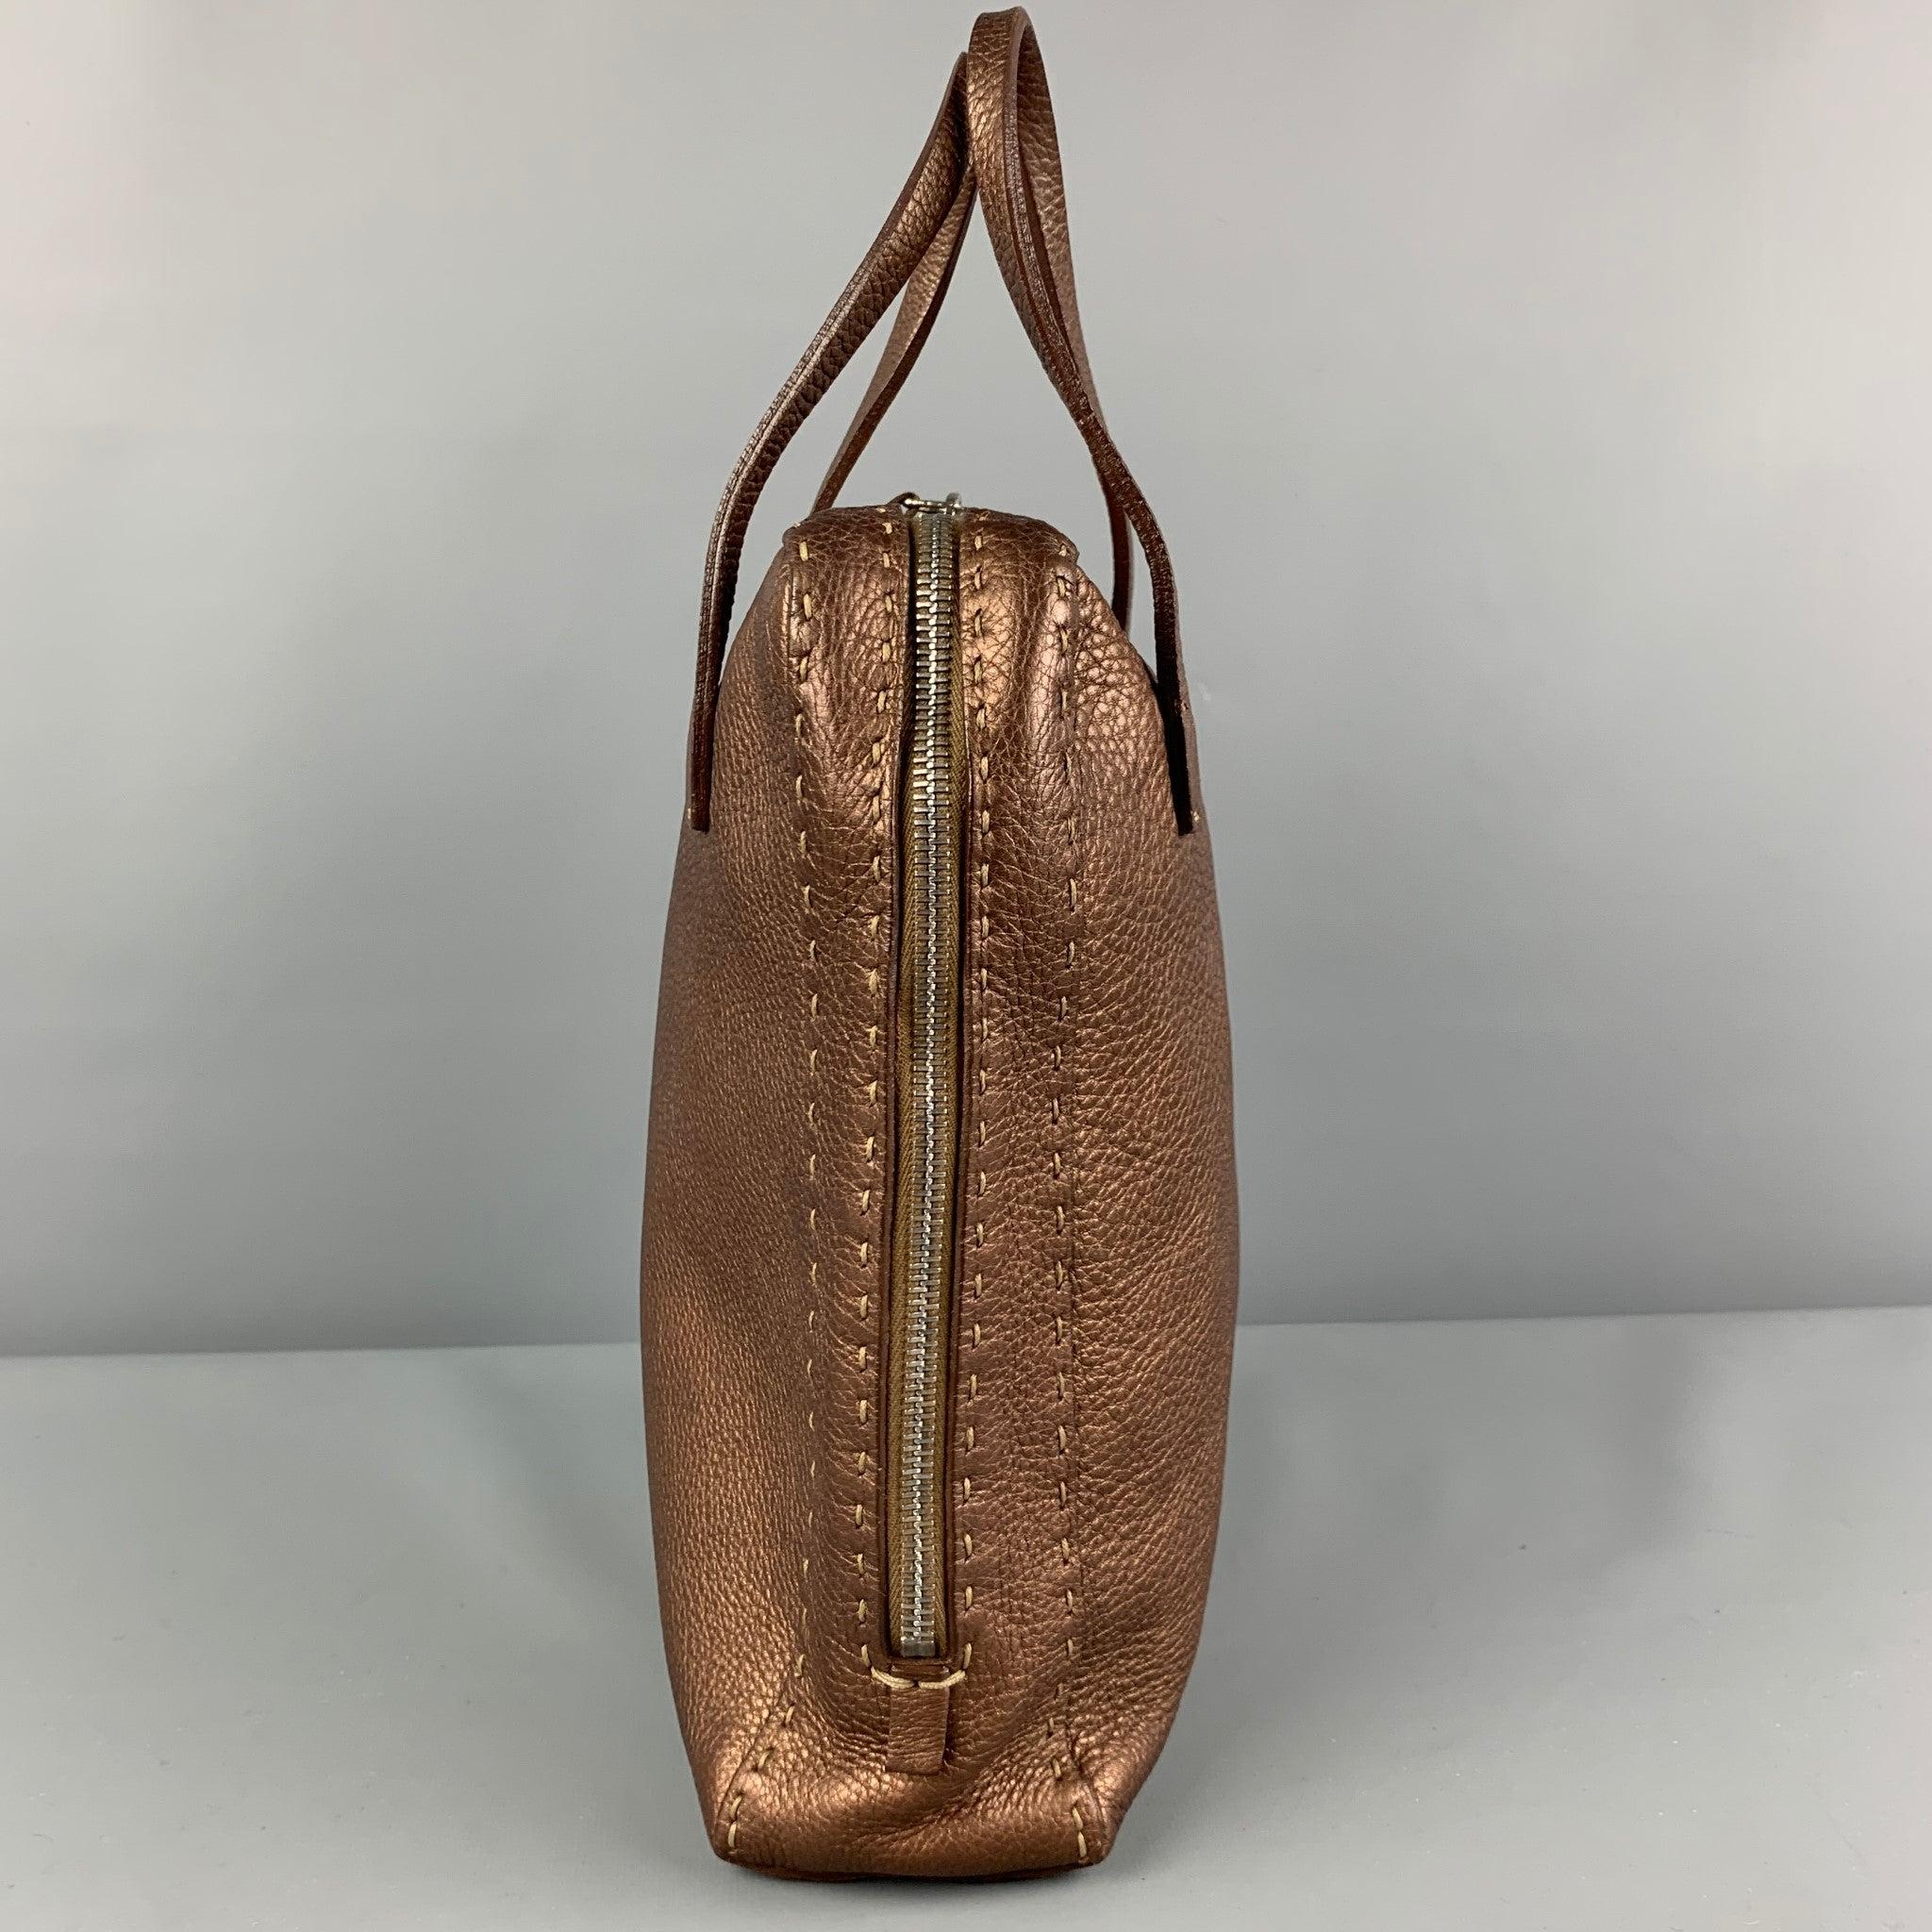 FENDI 'SELLERIA' bag comes in a copper pebble grain leather featuring top handles, top stitching, inner slots, top handles, and a dual zipper closure. Made in Italy.
Very Good
Pre-Owned Condition. 

Marked:   N49-11859 

Measurements: 
  Length:
8.5